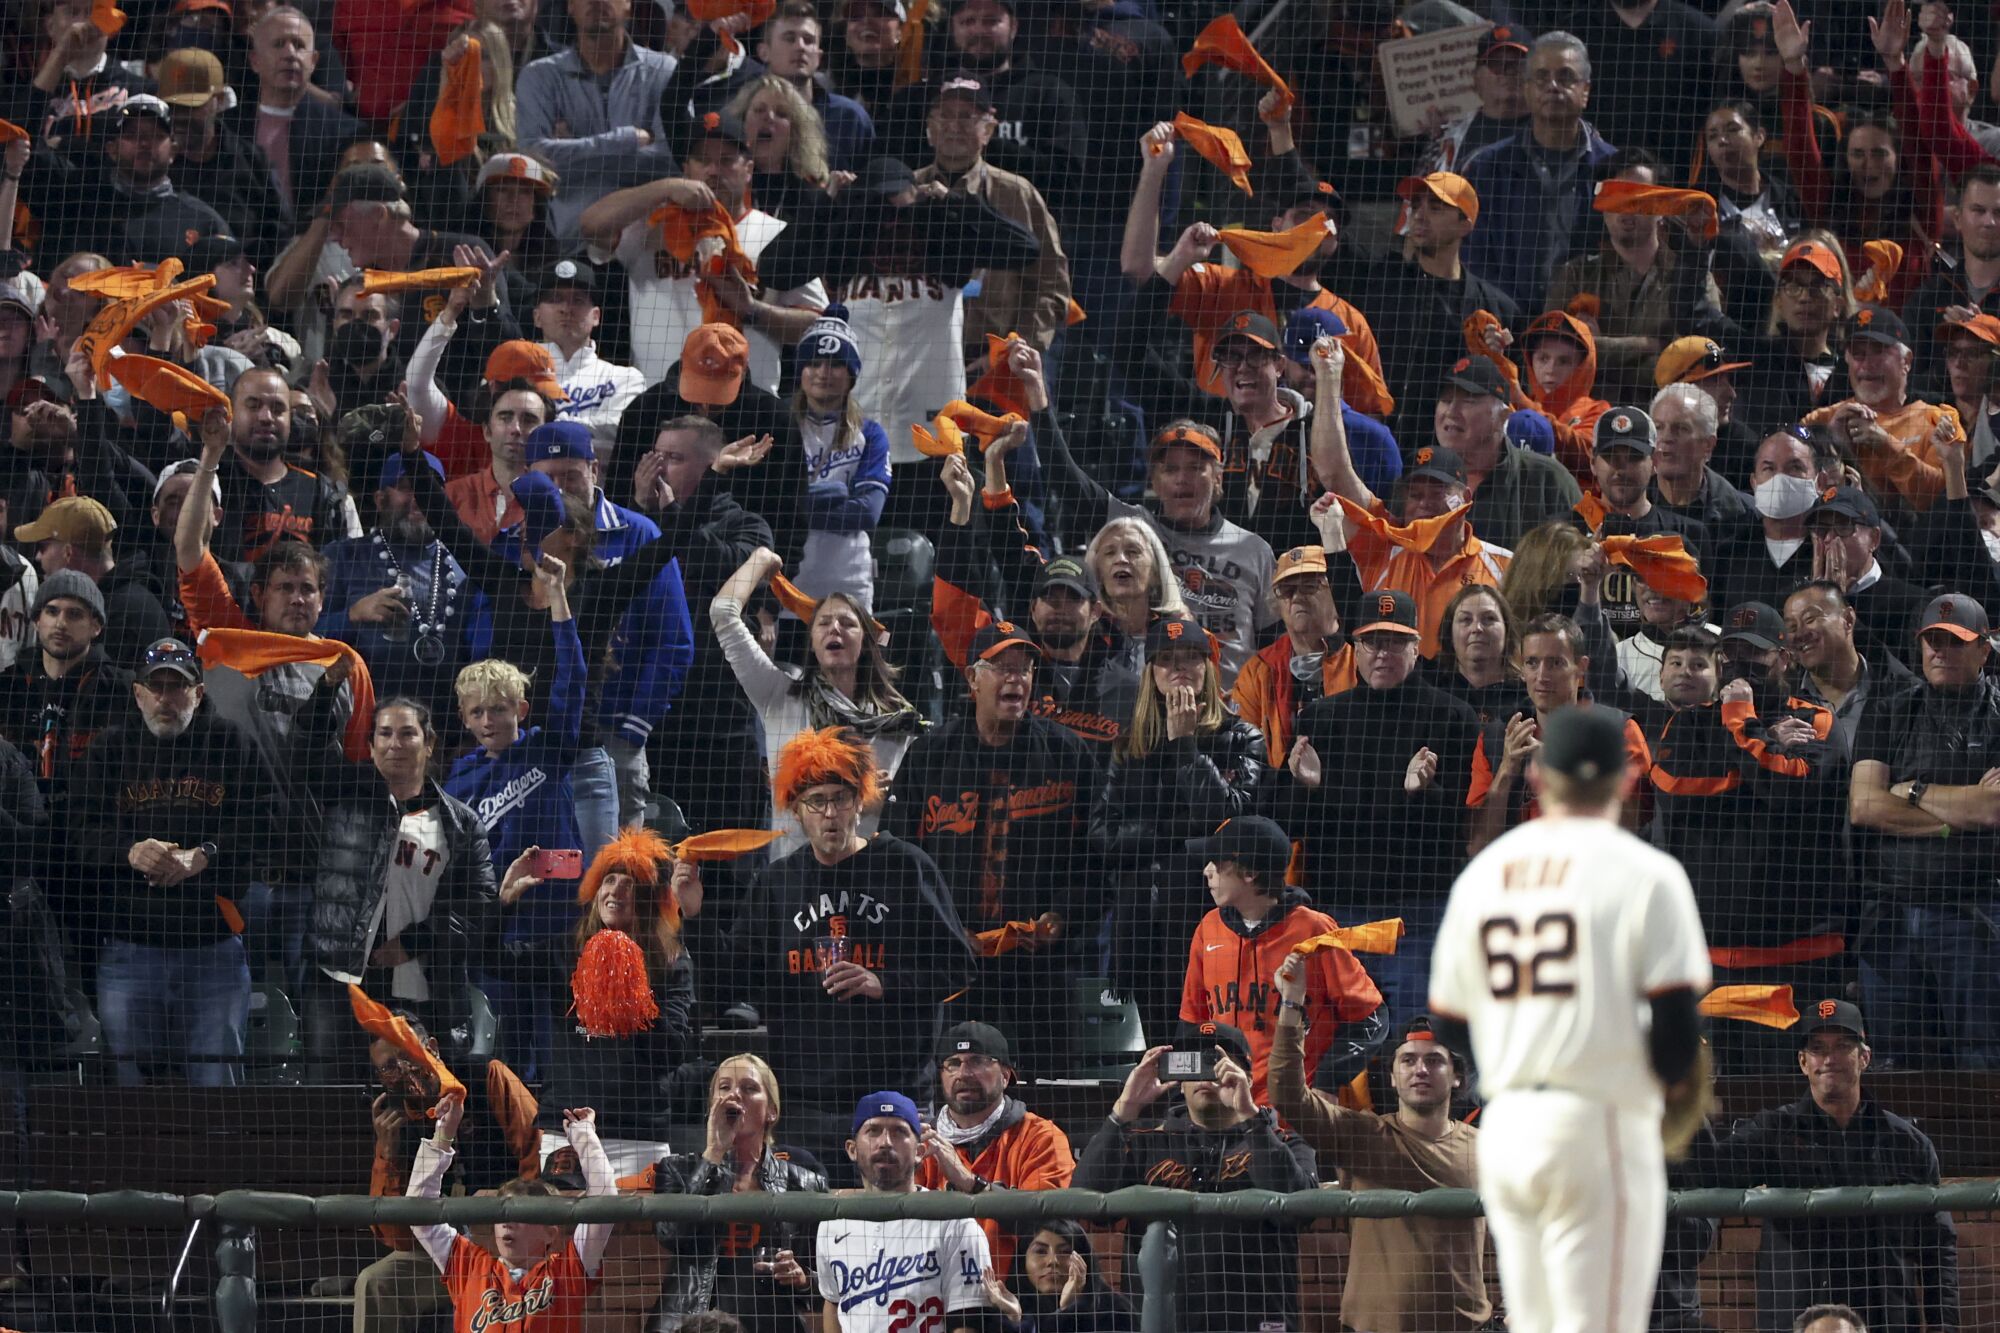 San Francisco Giants fans cheer as starting pitcher Logan Webb prepares to pitch